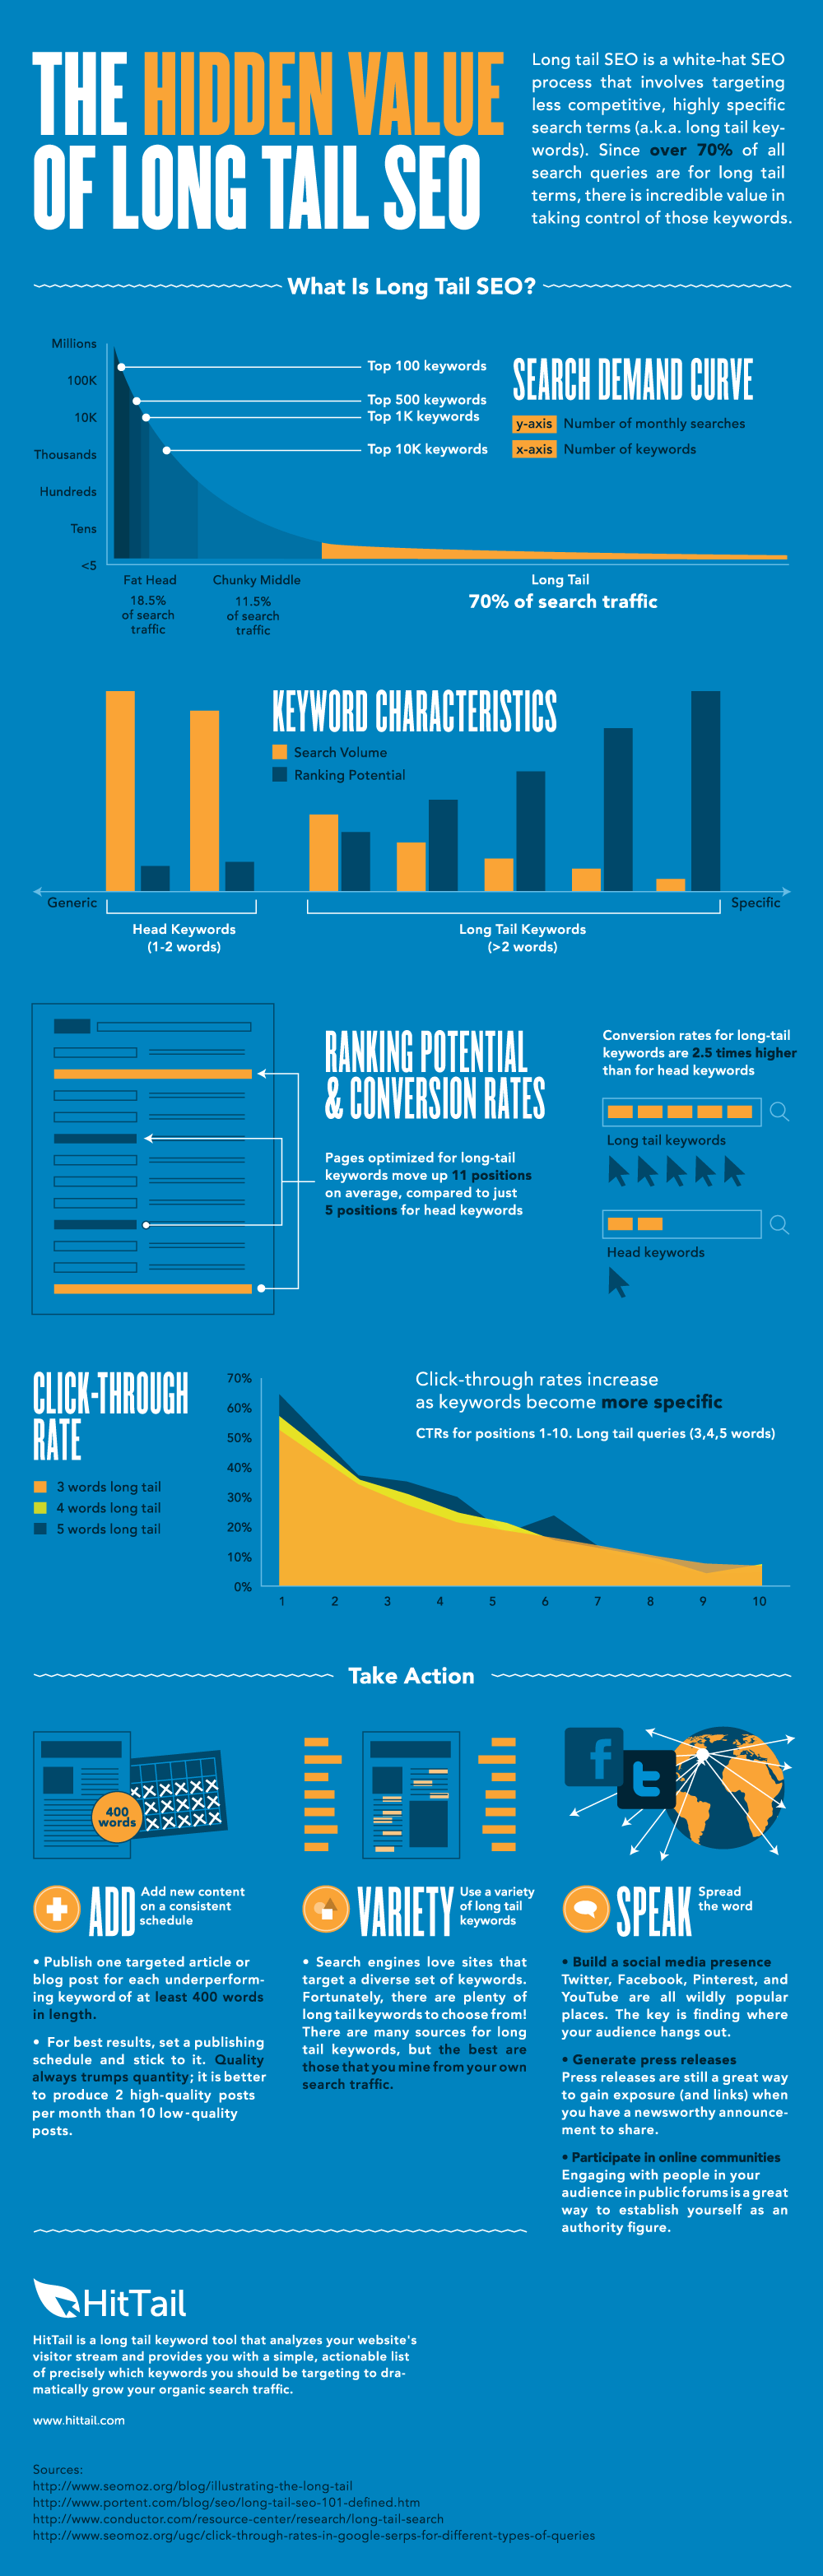 SEO for Small Business: The Secret of Long-Tail Keywords [Infographic]